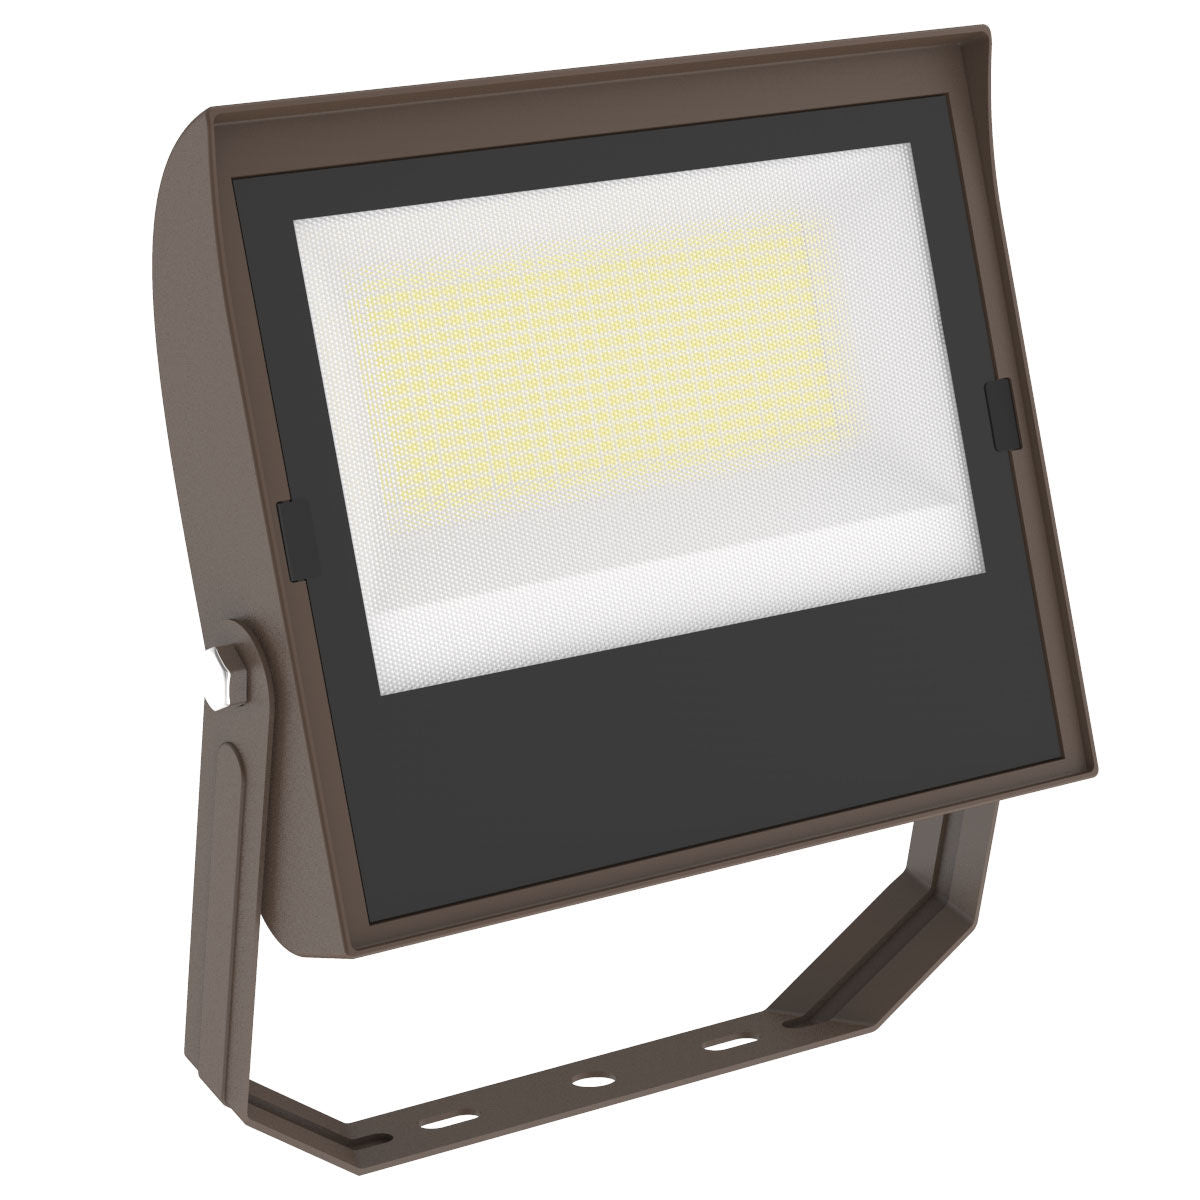 Westgate LFXE-MD-50-100W-MCTP-TR-P Flood/Area Light with Photocell Type 3 Lens (Photocell Disconnect Switch) - Dark Bronze